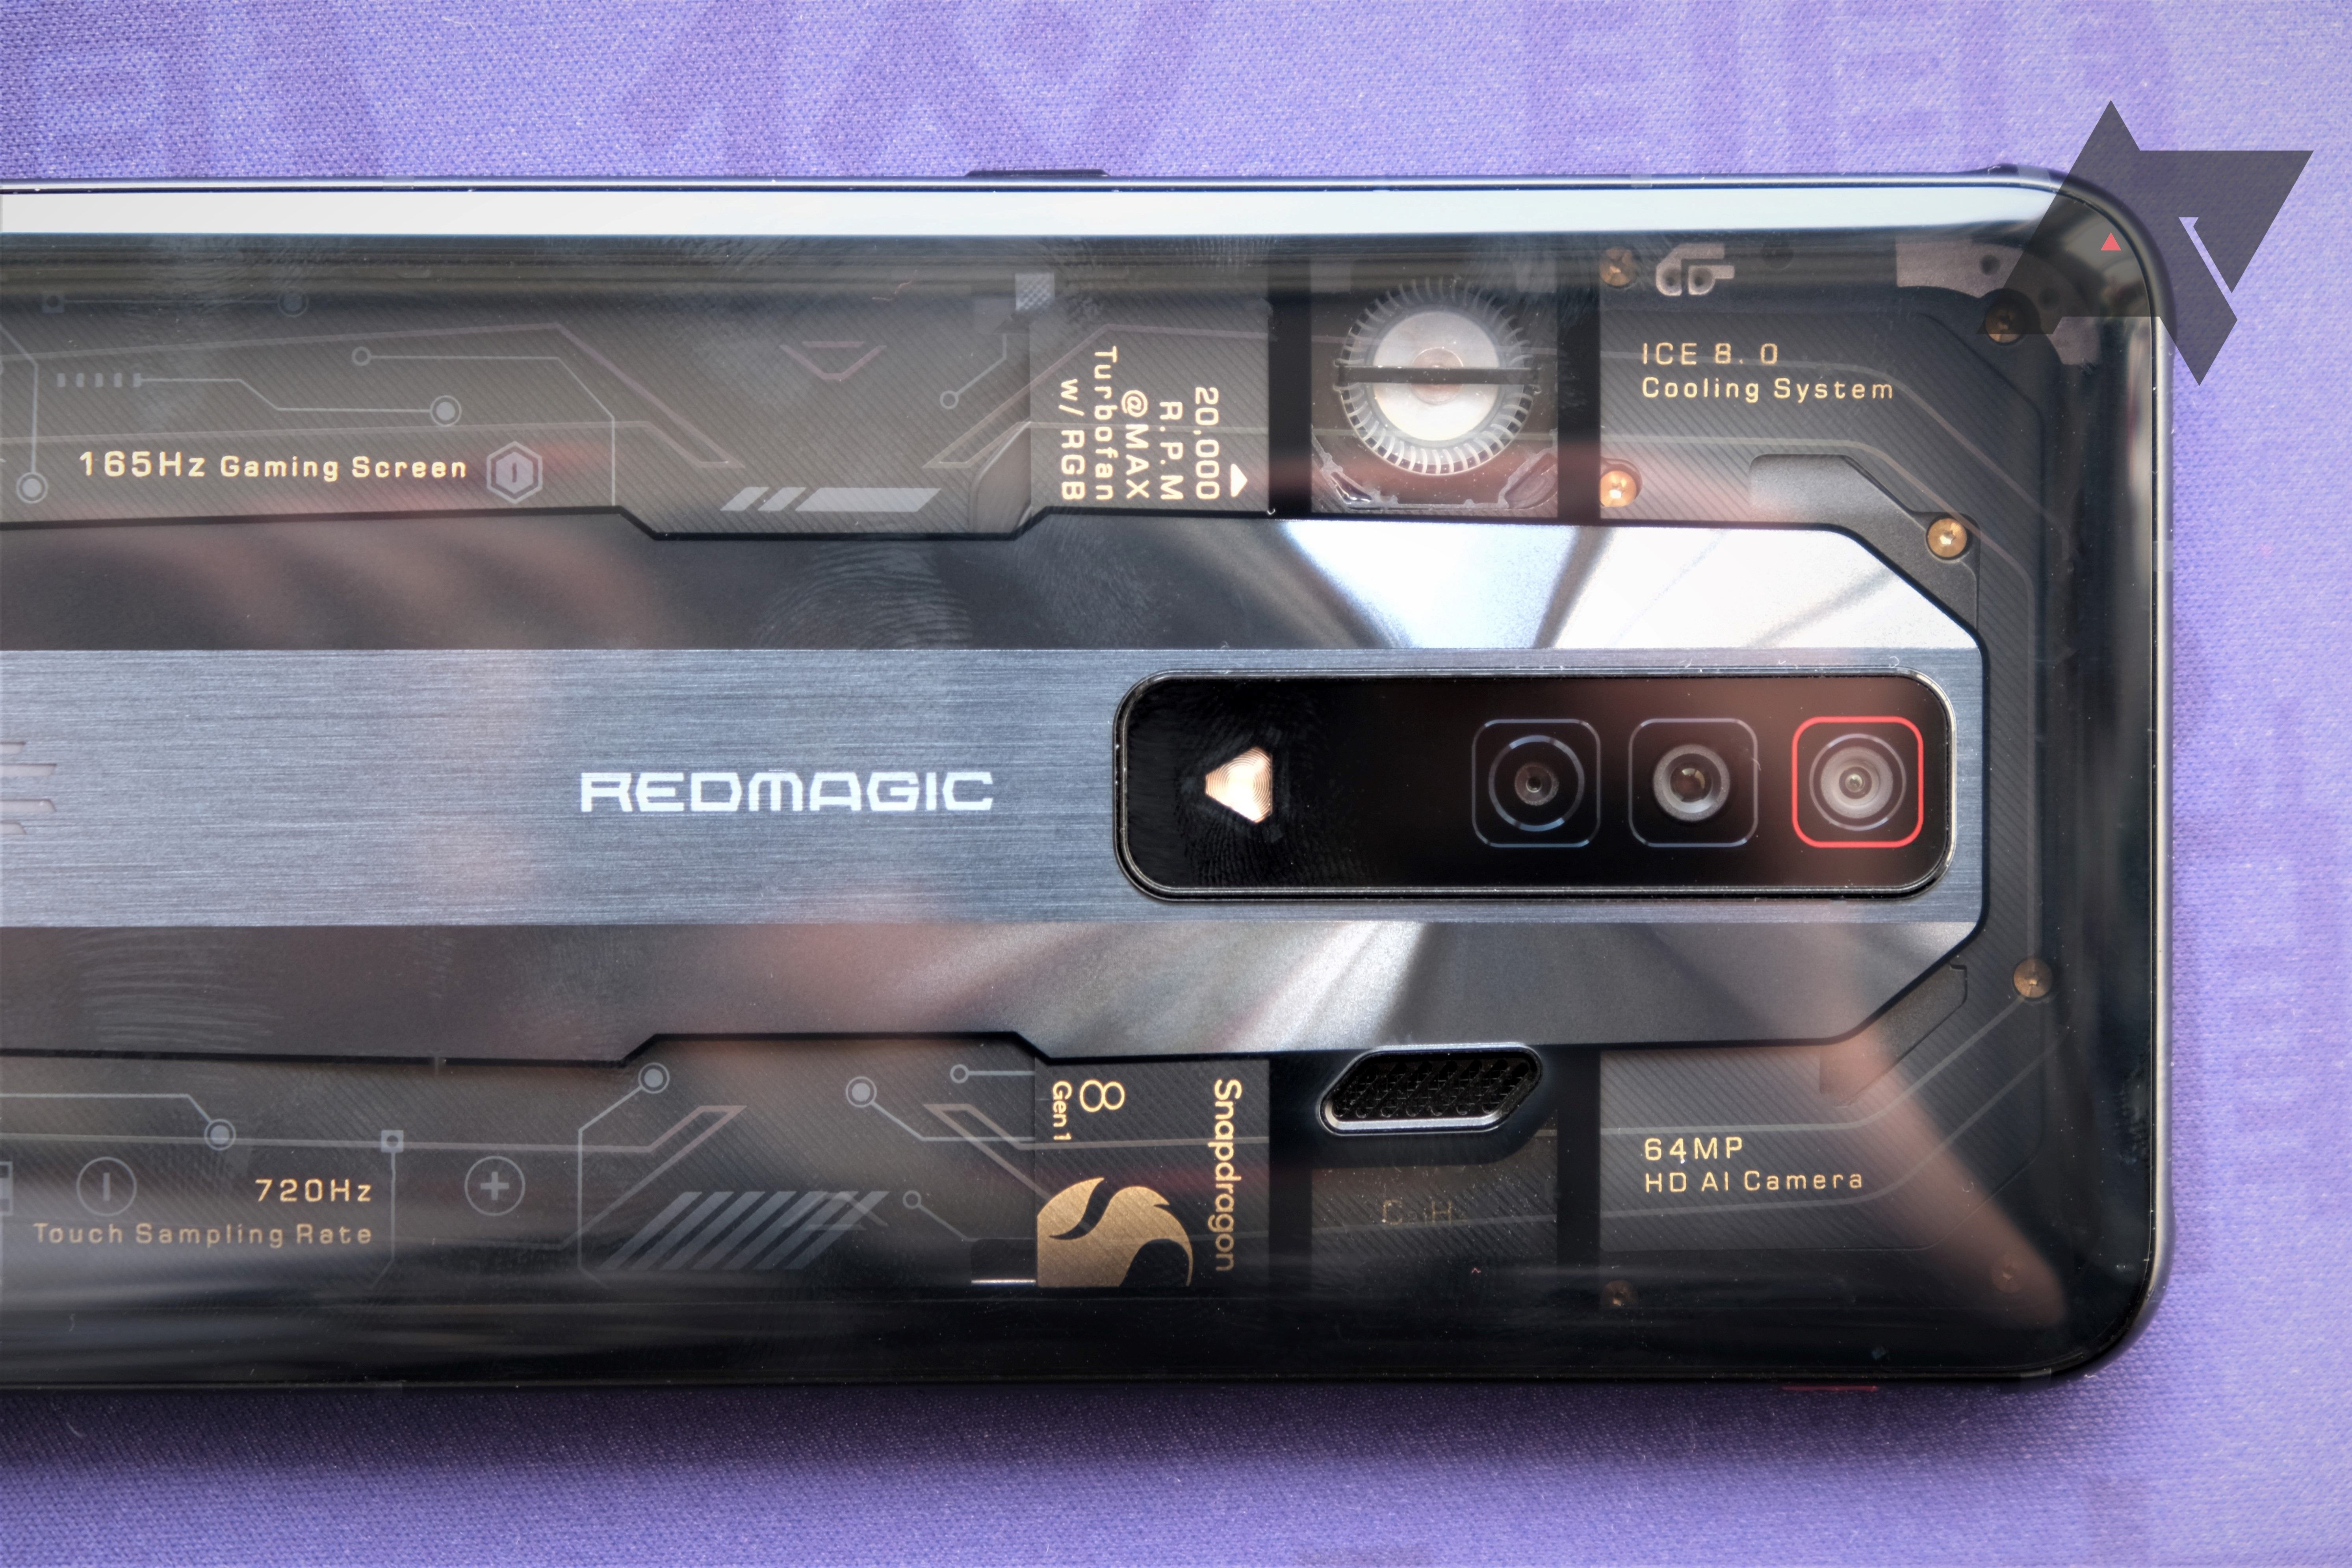 RedMagic 7 review: Pulling out the big guns